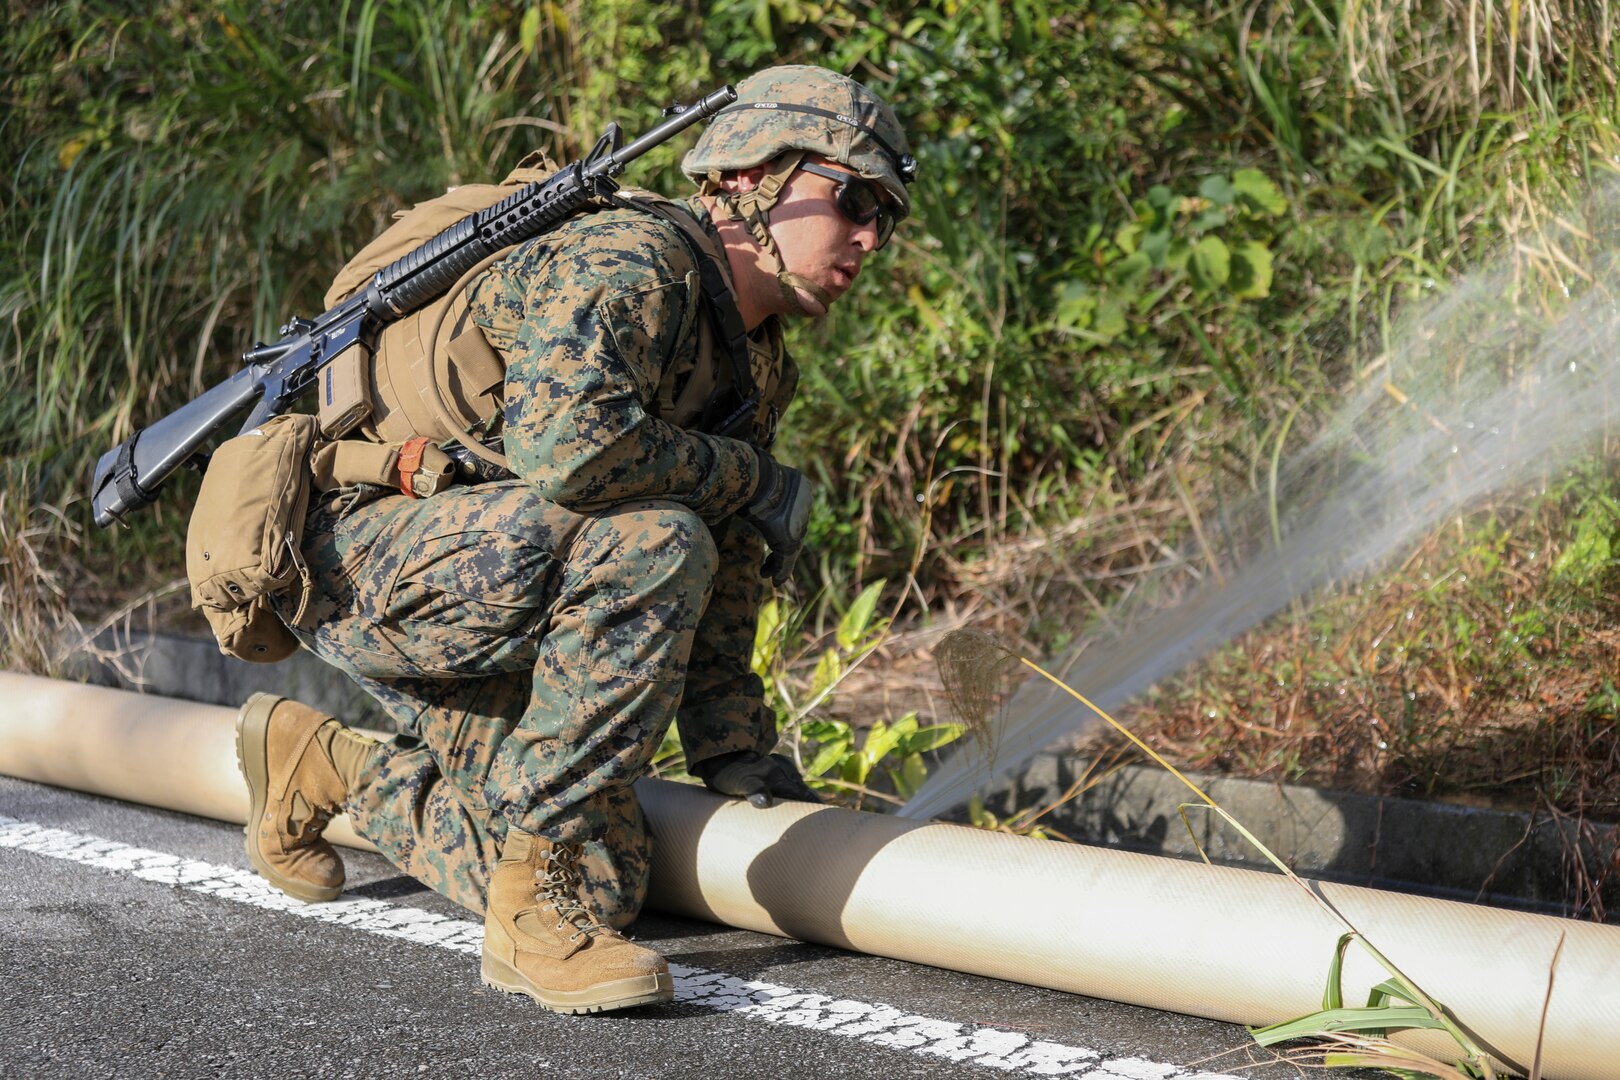 Lance Cpl. Daniel D. Cruz examines a hole in a fuel hose on Jan. 28, 2019 at Central Training Area, Camp Hansen, Okinawa, Japan. Marines with 2nd Platoon, Bulk Fuel Company, 9th Engineer Support Battalion, 3rd Marine Logistics Group patrol fuel lines to ensure the integrity of the hose is compromised. Bulk Fuel Specialists assembled fuel sites across the CTA to enhance their training and readiness within a harsh environment. The Marines set up and maintained their bulk fuel equipment during a week-long training evolution. Cruz, a native of Tulare, California, is a bulk fuel specialist with 2nd Plt., Bulk Fuel Co., 9th ESB, 3rd MLG. (U.S. Marine Corps photo by Lance Cpl. Armando Elizalde)